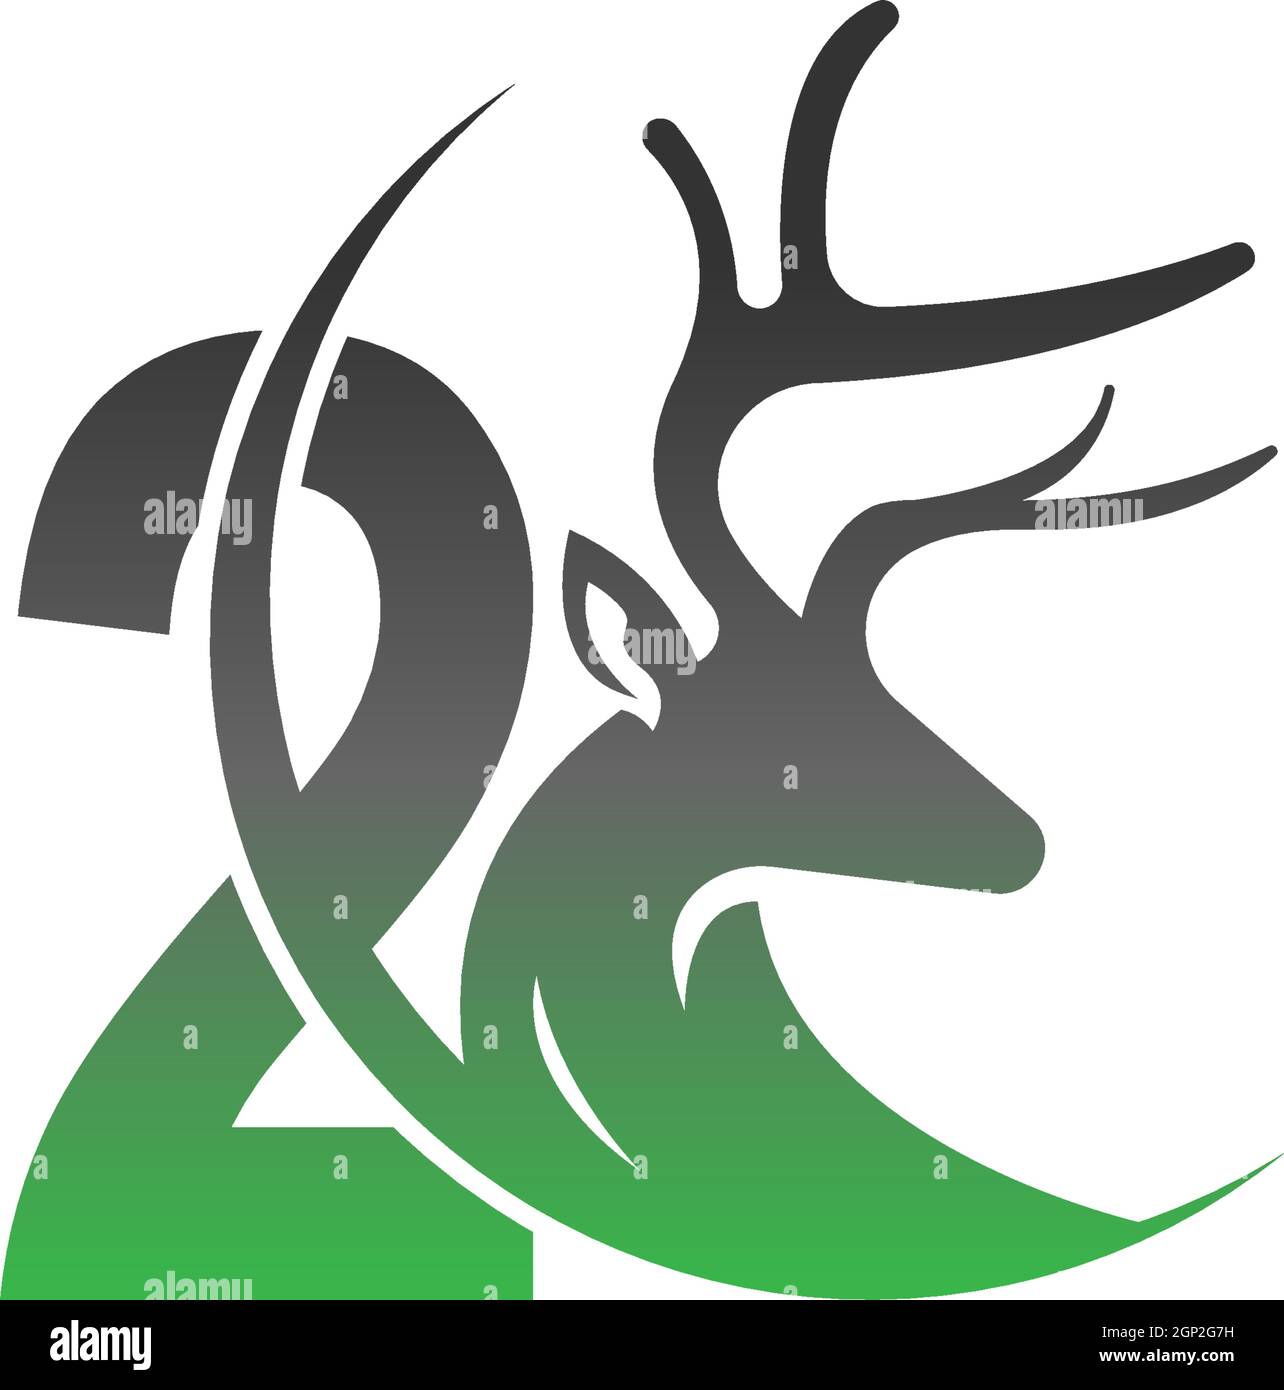 Number 2 icon logo with deer illustration design Stock Vector